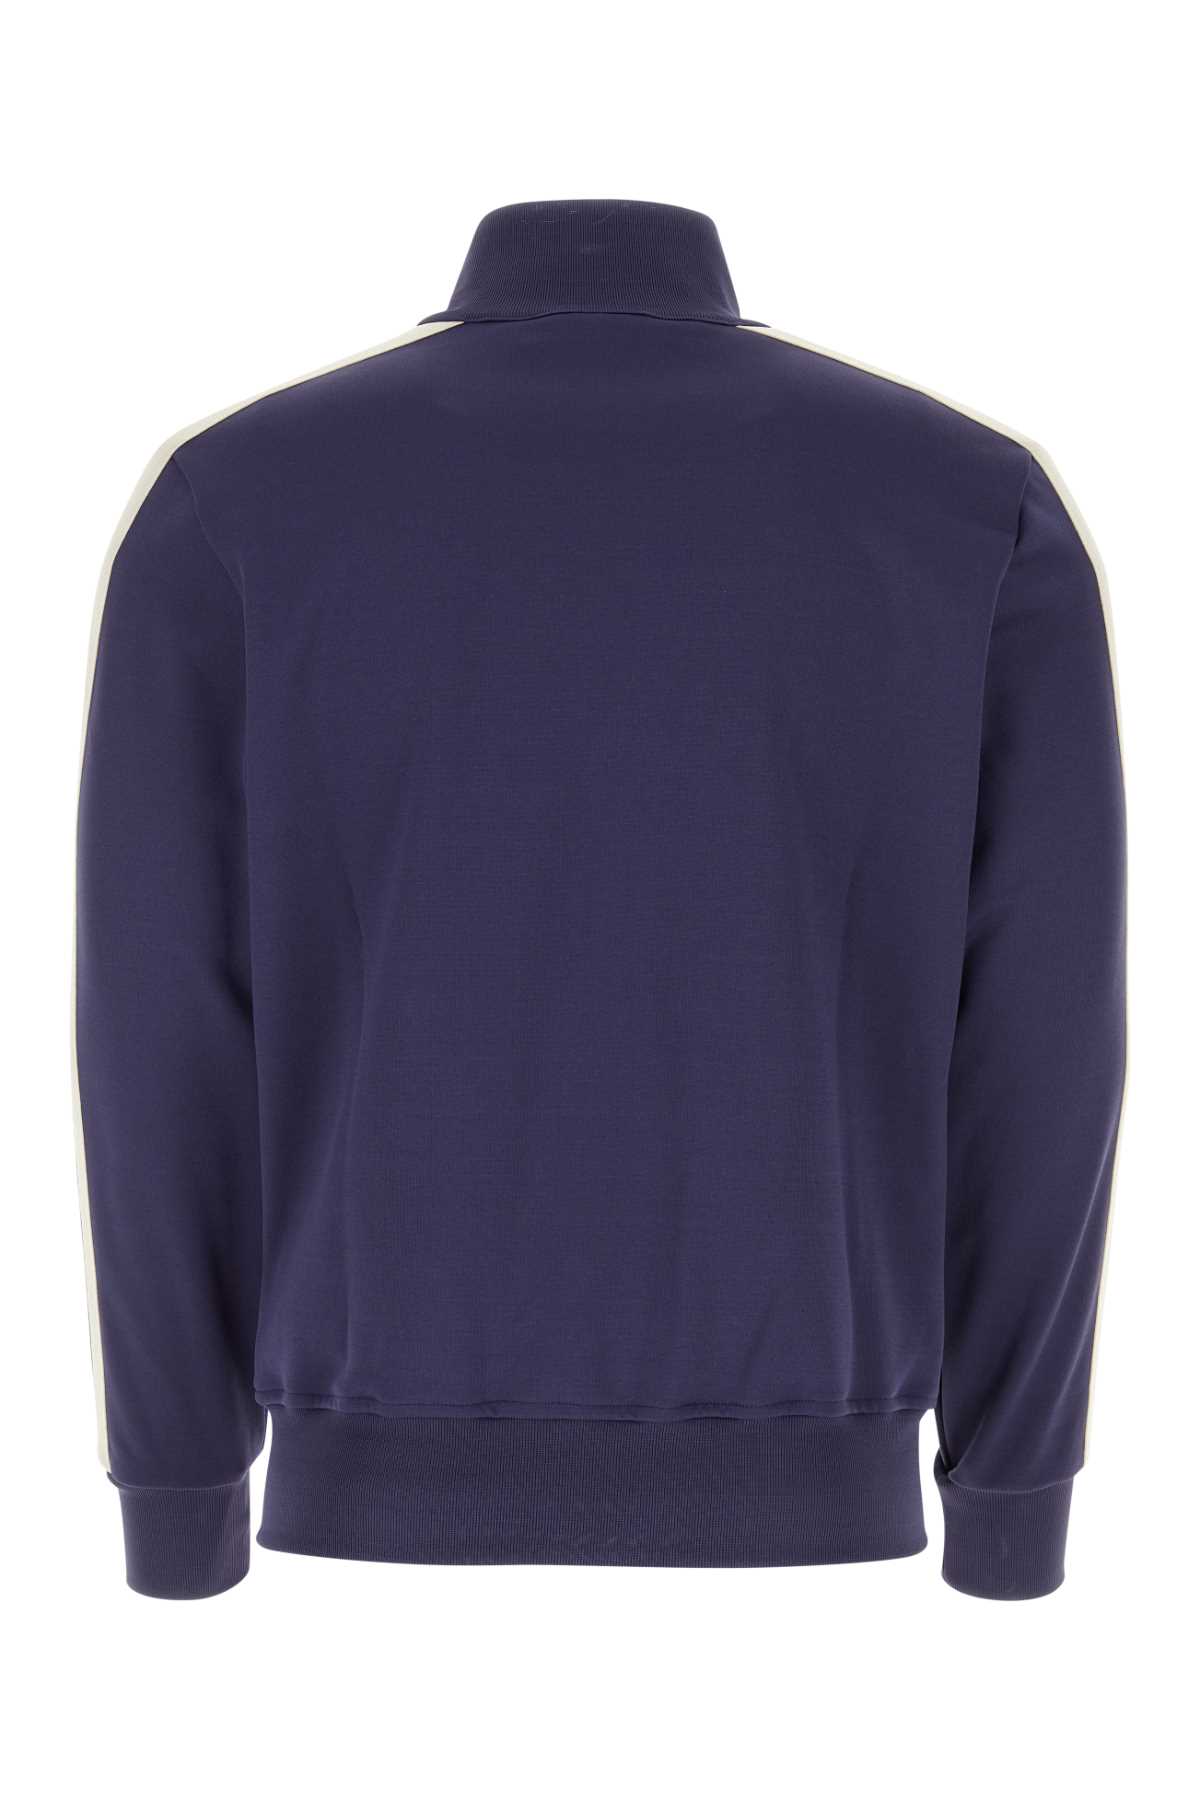 Palm Angels Blue Polyester Sweatshirt In Navyblue